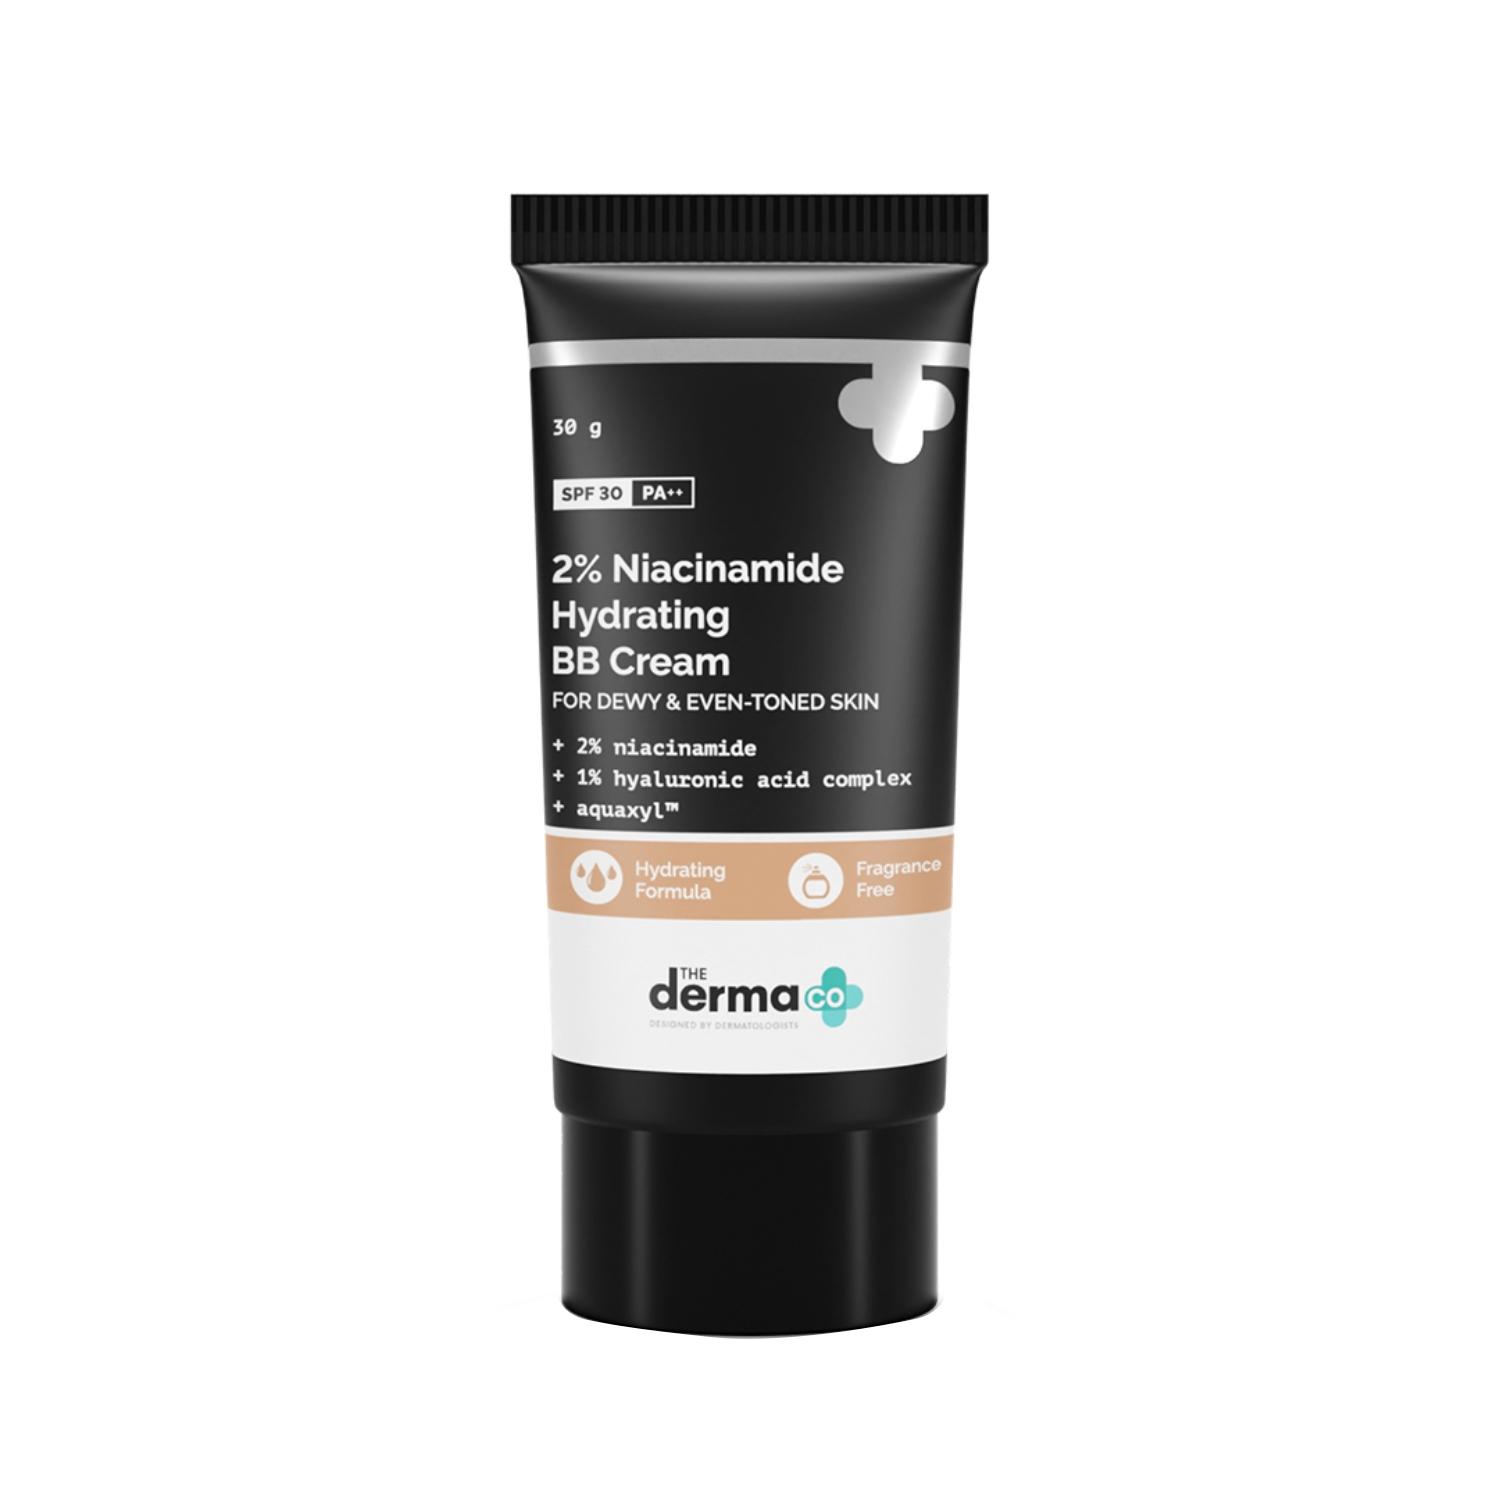 the derma co 2% niacinamide hydrating bb cream with spf 30 pa++ - beige (30g)